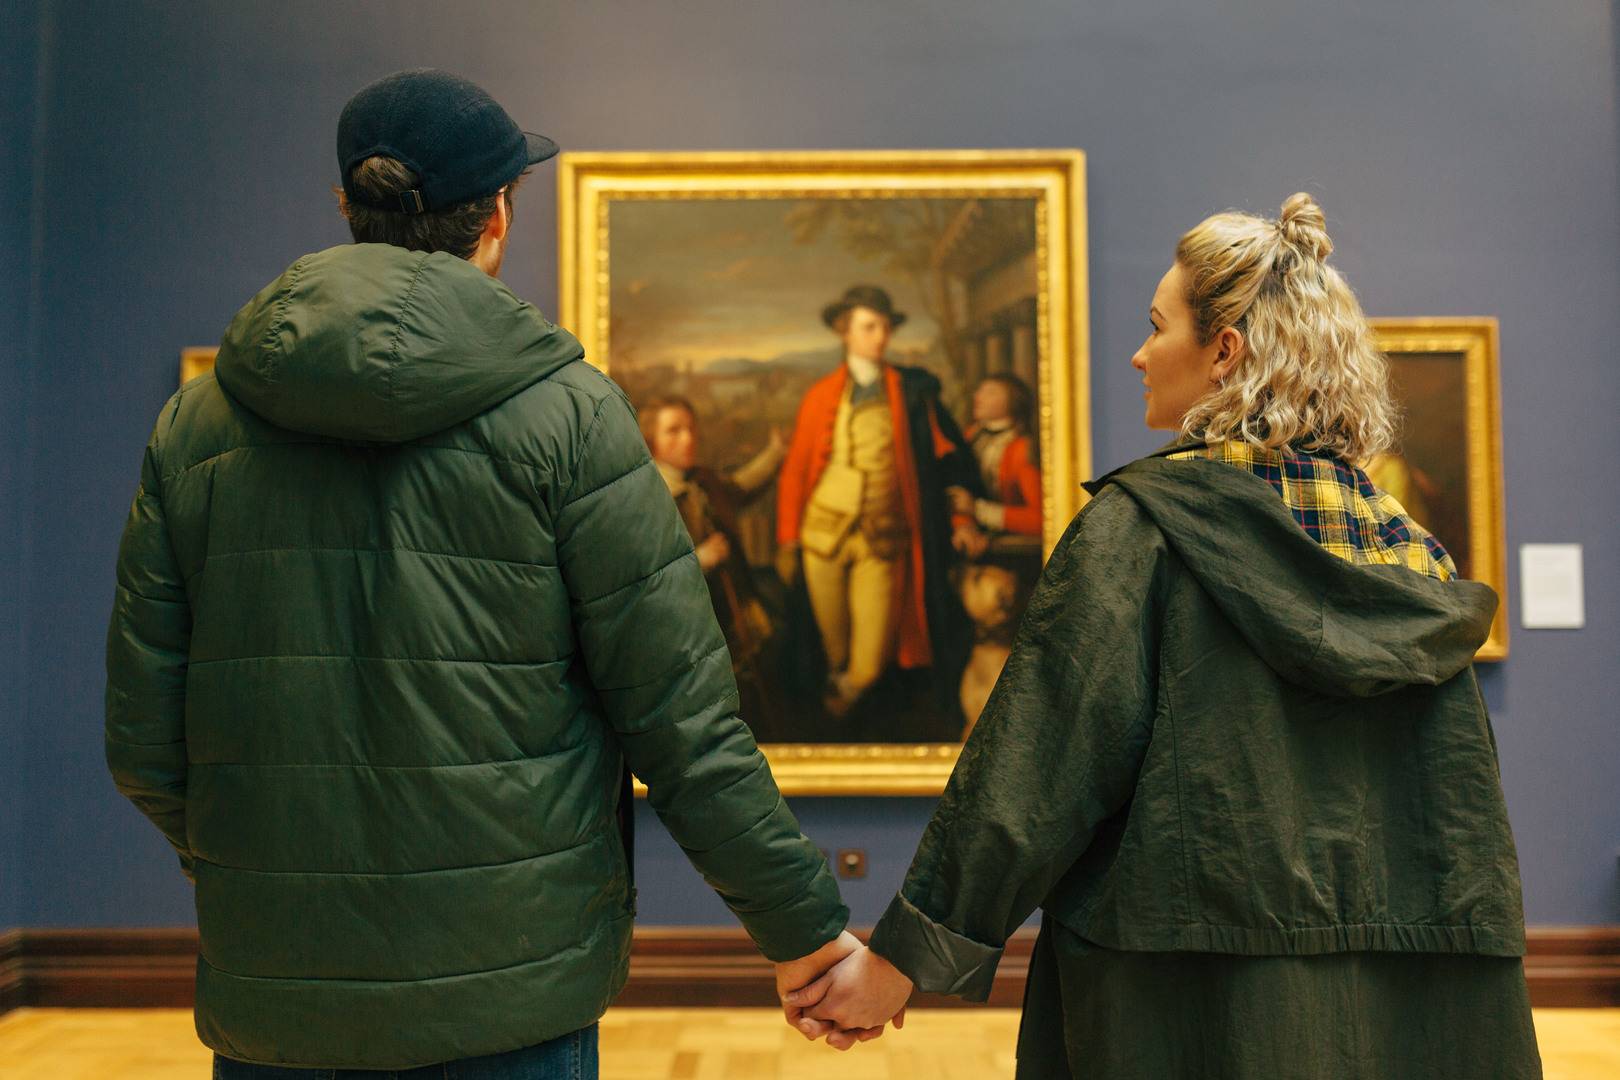 A couple hold hands in front of an historic painting, National Galleries of Scotland